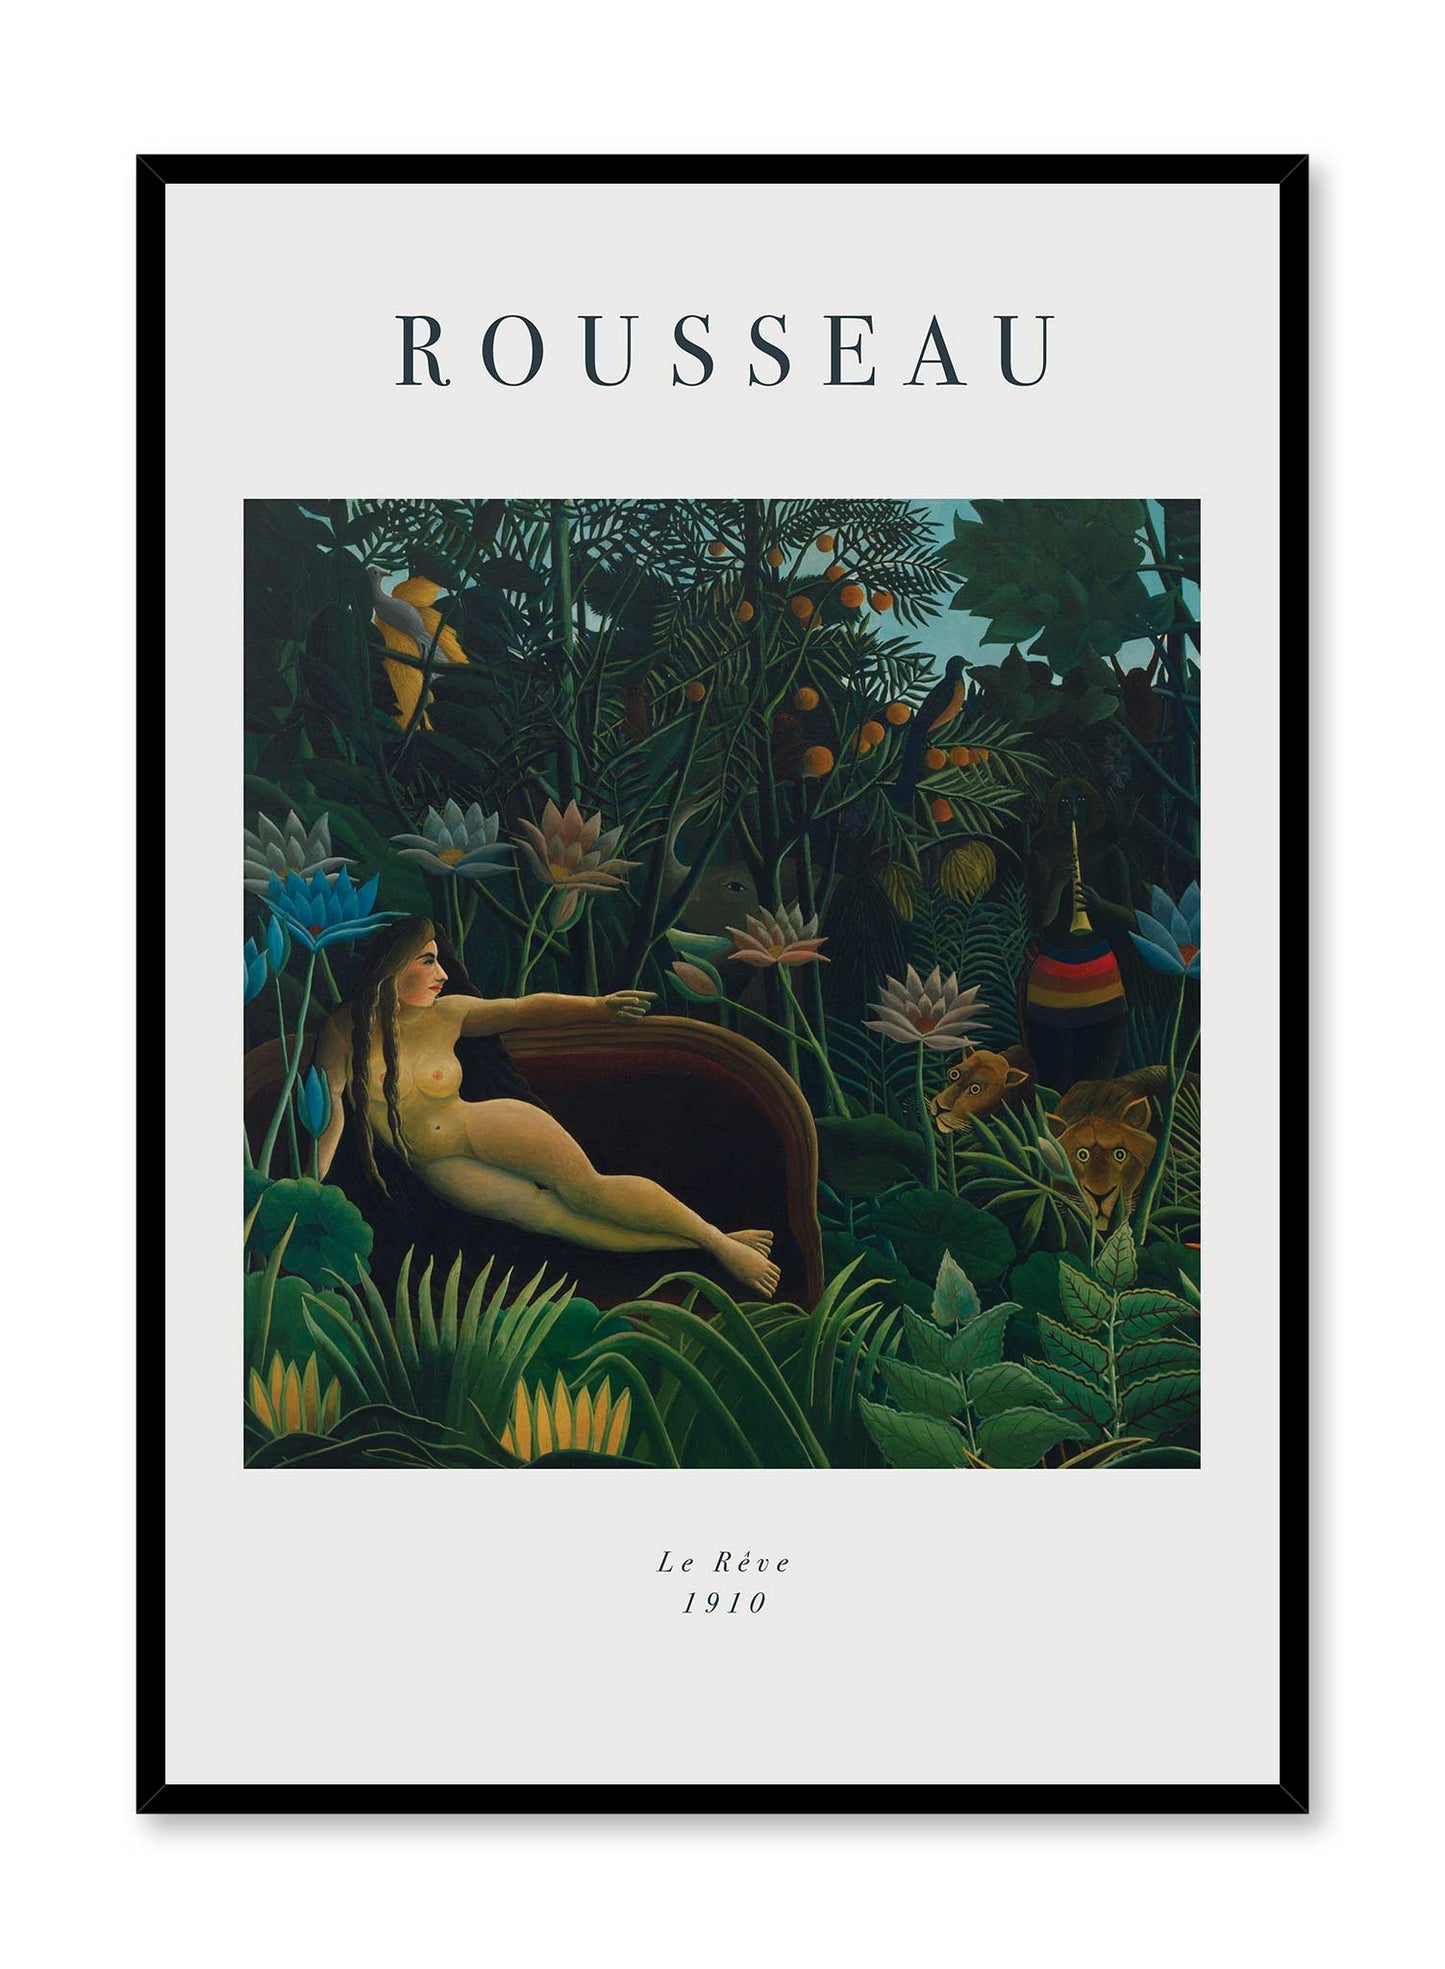 The Dream is a minimalist artwork by Opposite Wall of Henri Rousseau's Le Rêve from 1910.